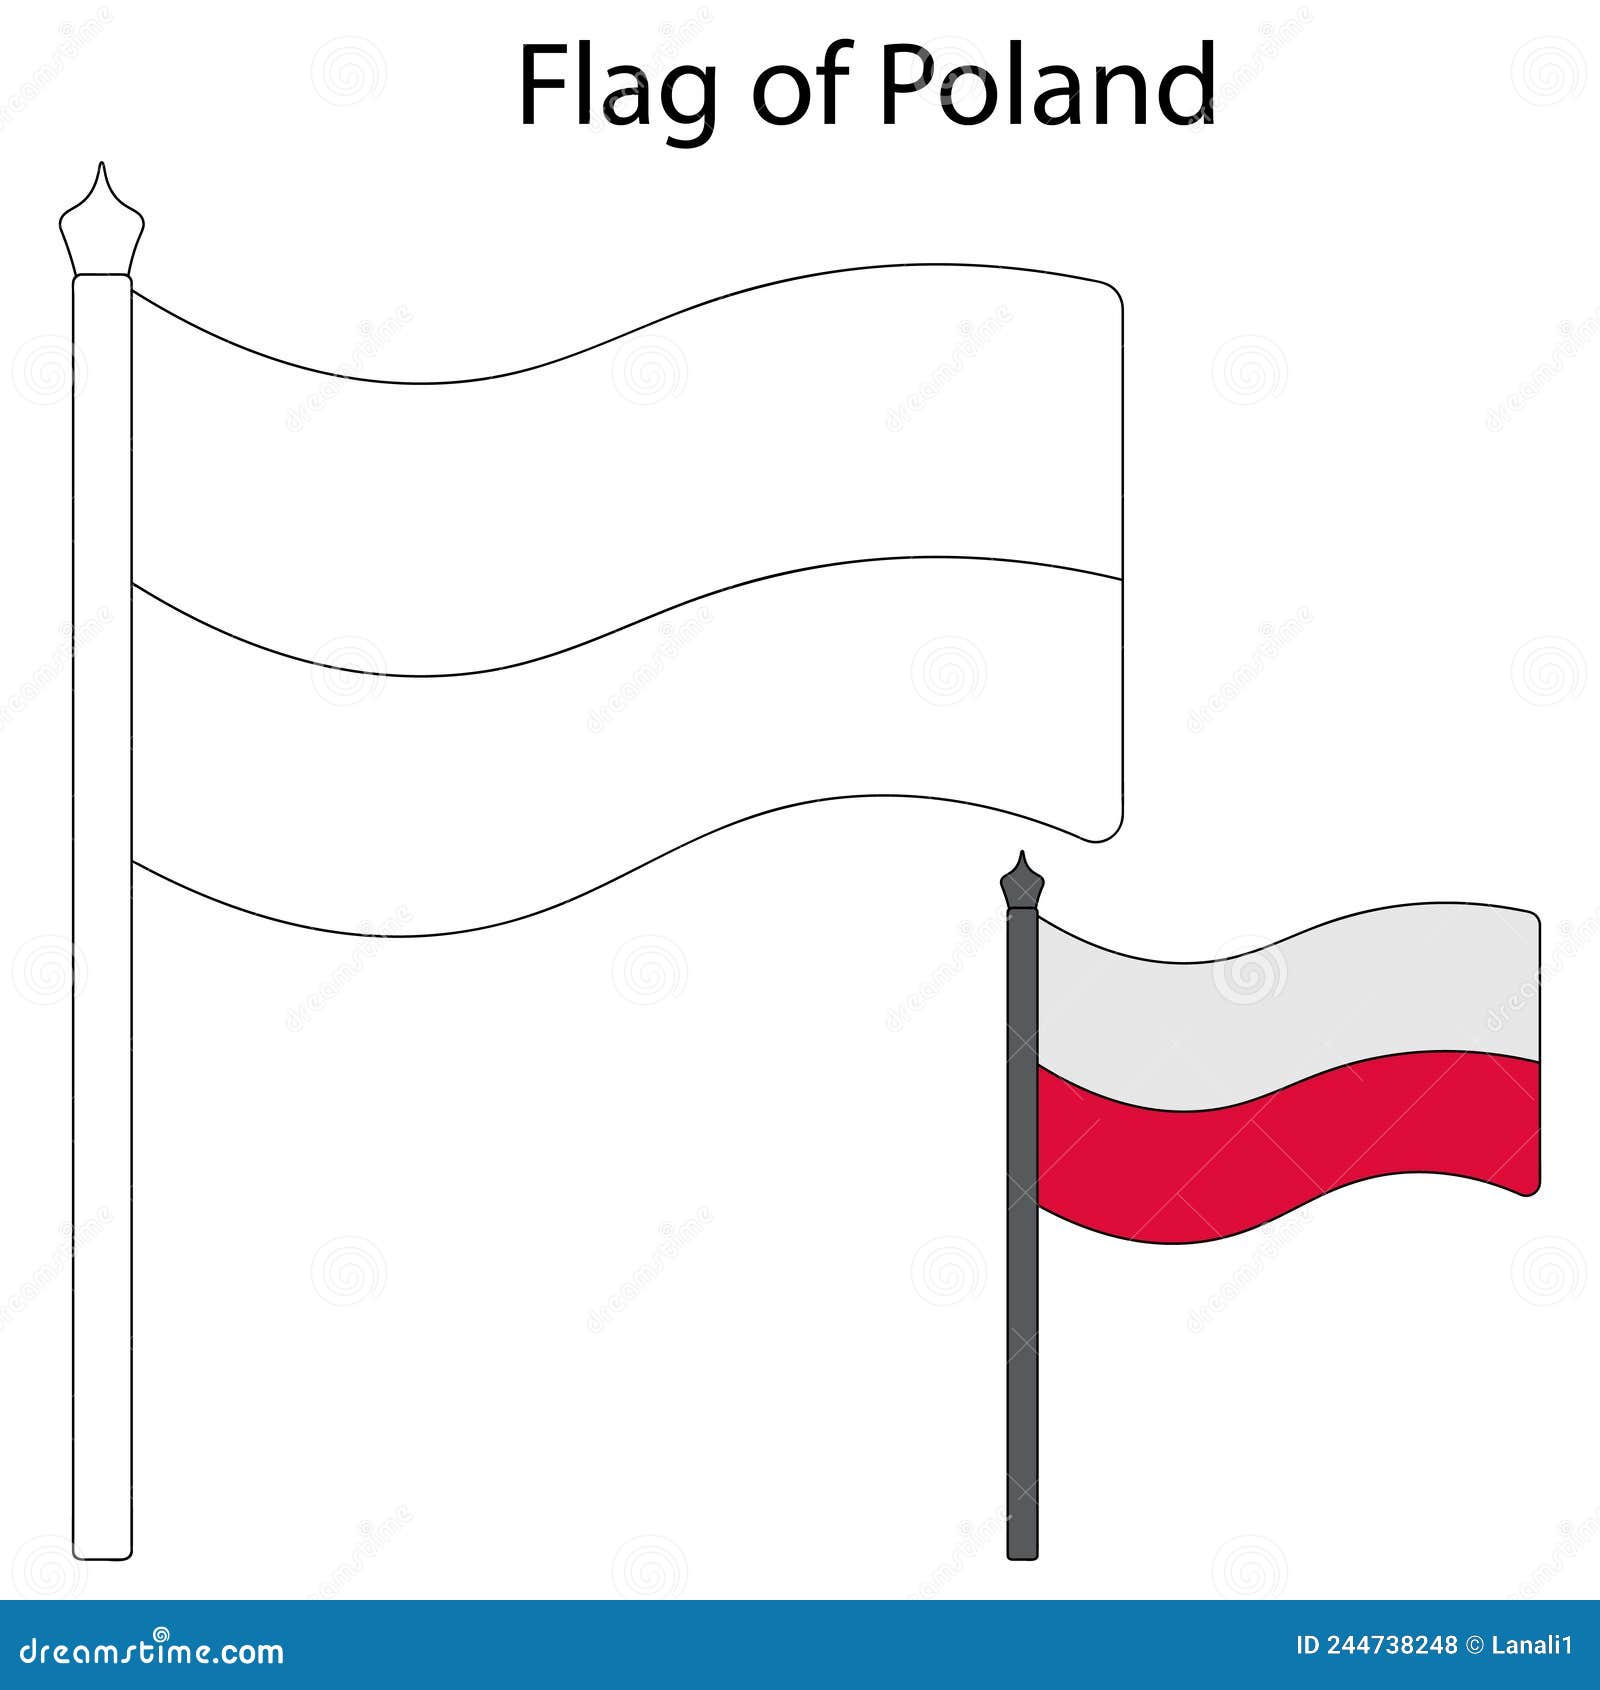 Flag of poland color the flag according to the given example vector illustration stock vector